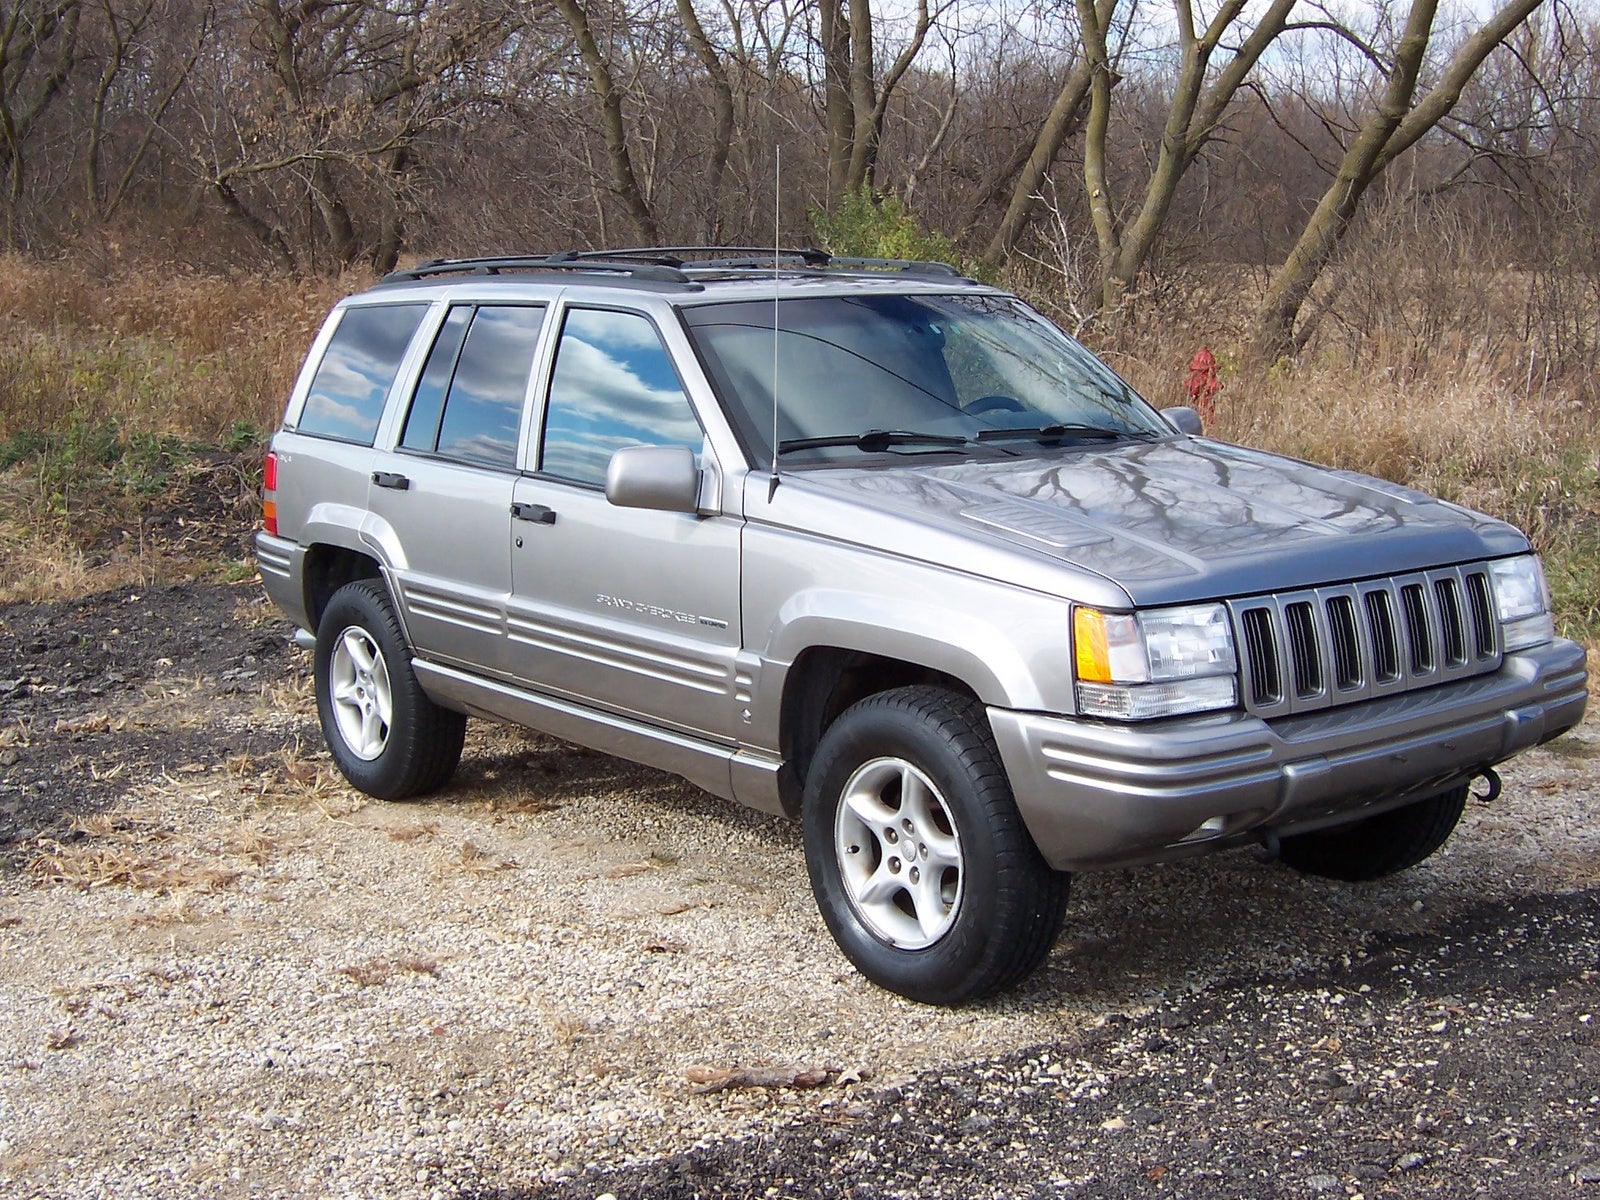 1998 Jeep grand cherokee limited edition specs